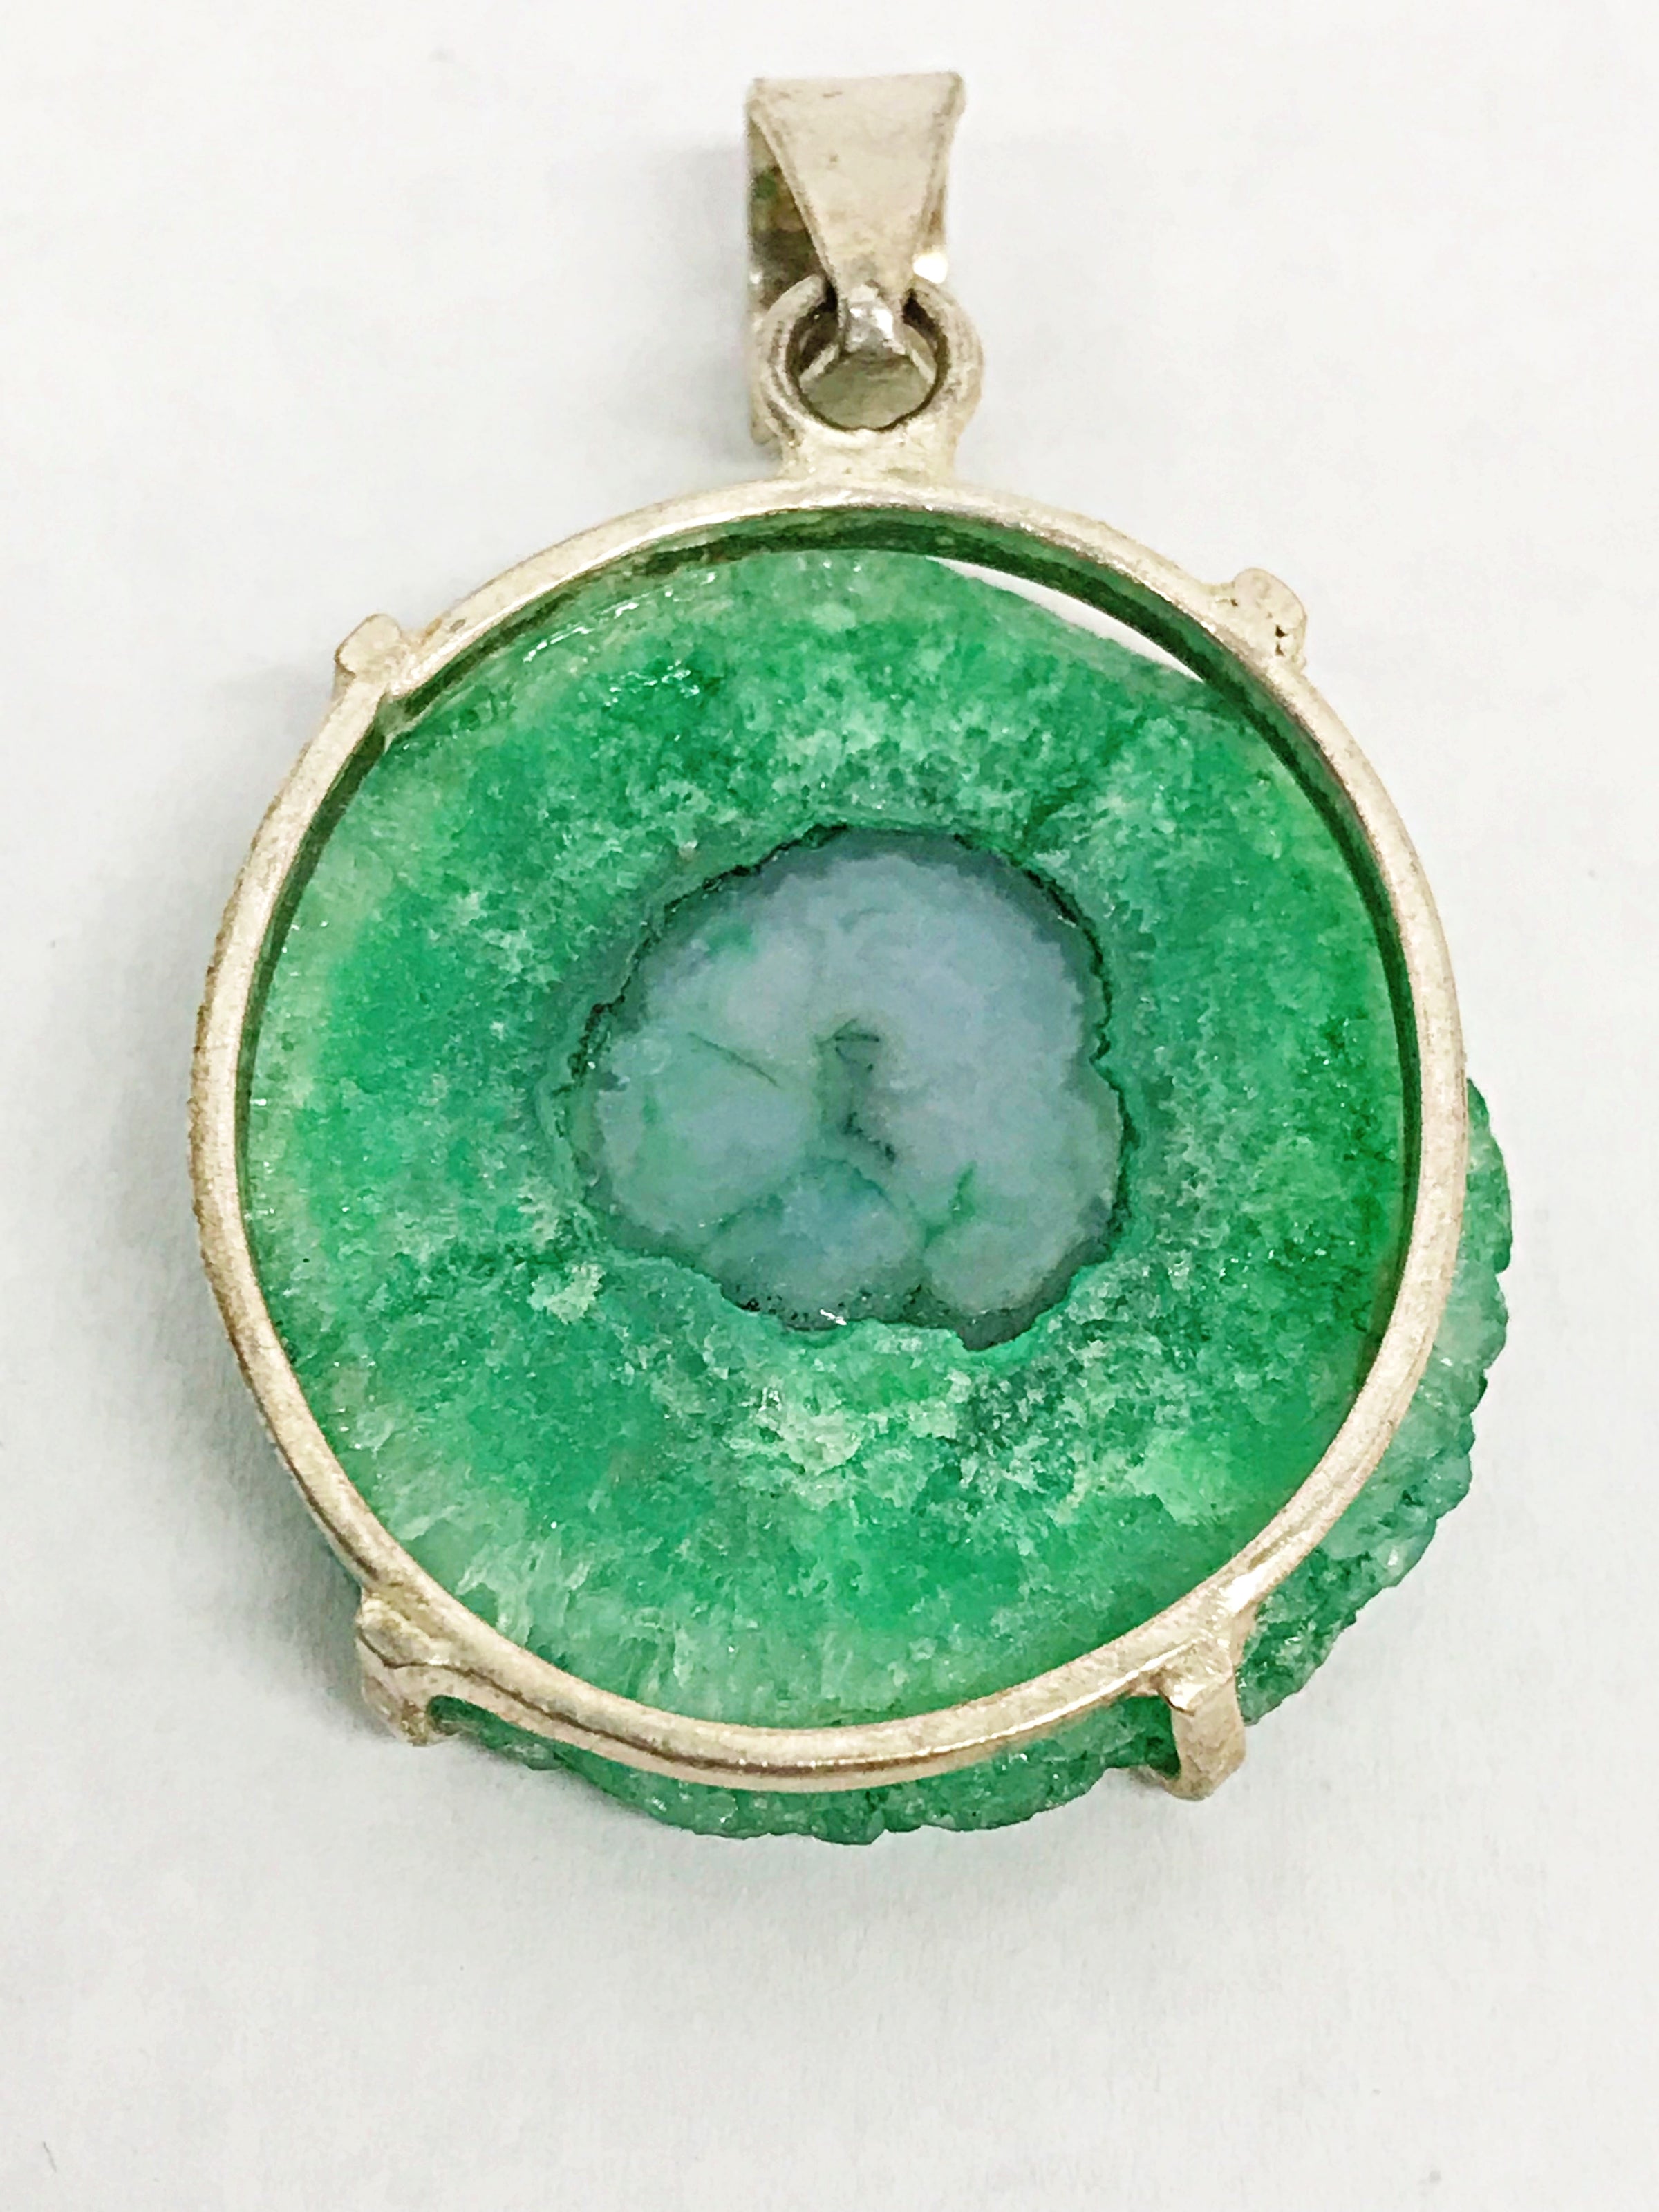 www.hersandhistreasures.com/products/green-geode-agate-slice-925-sterling-silver-pendant